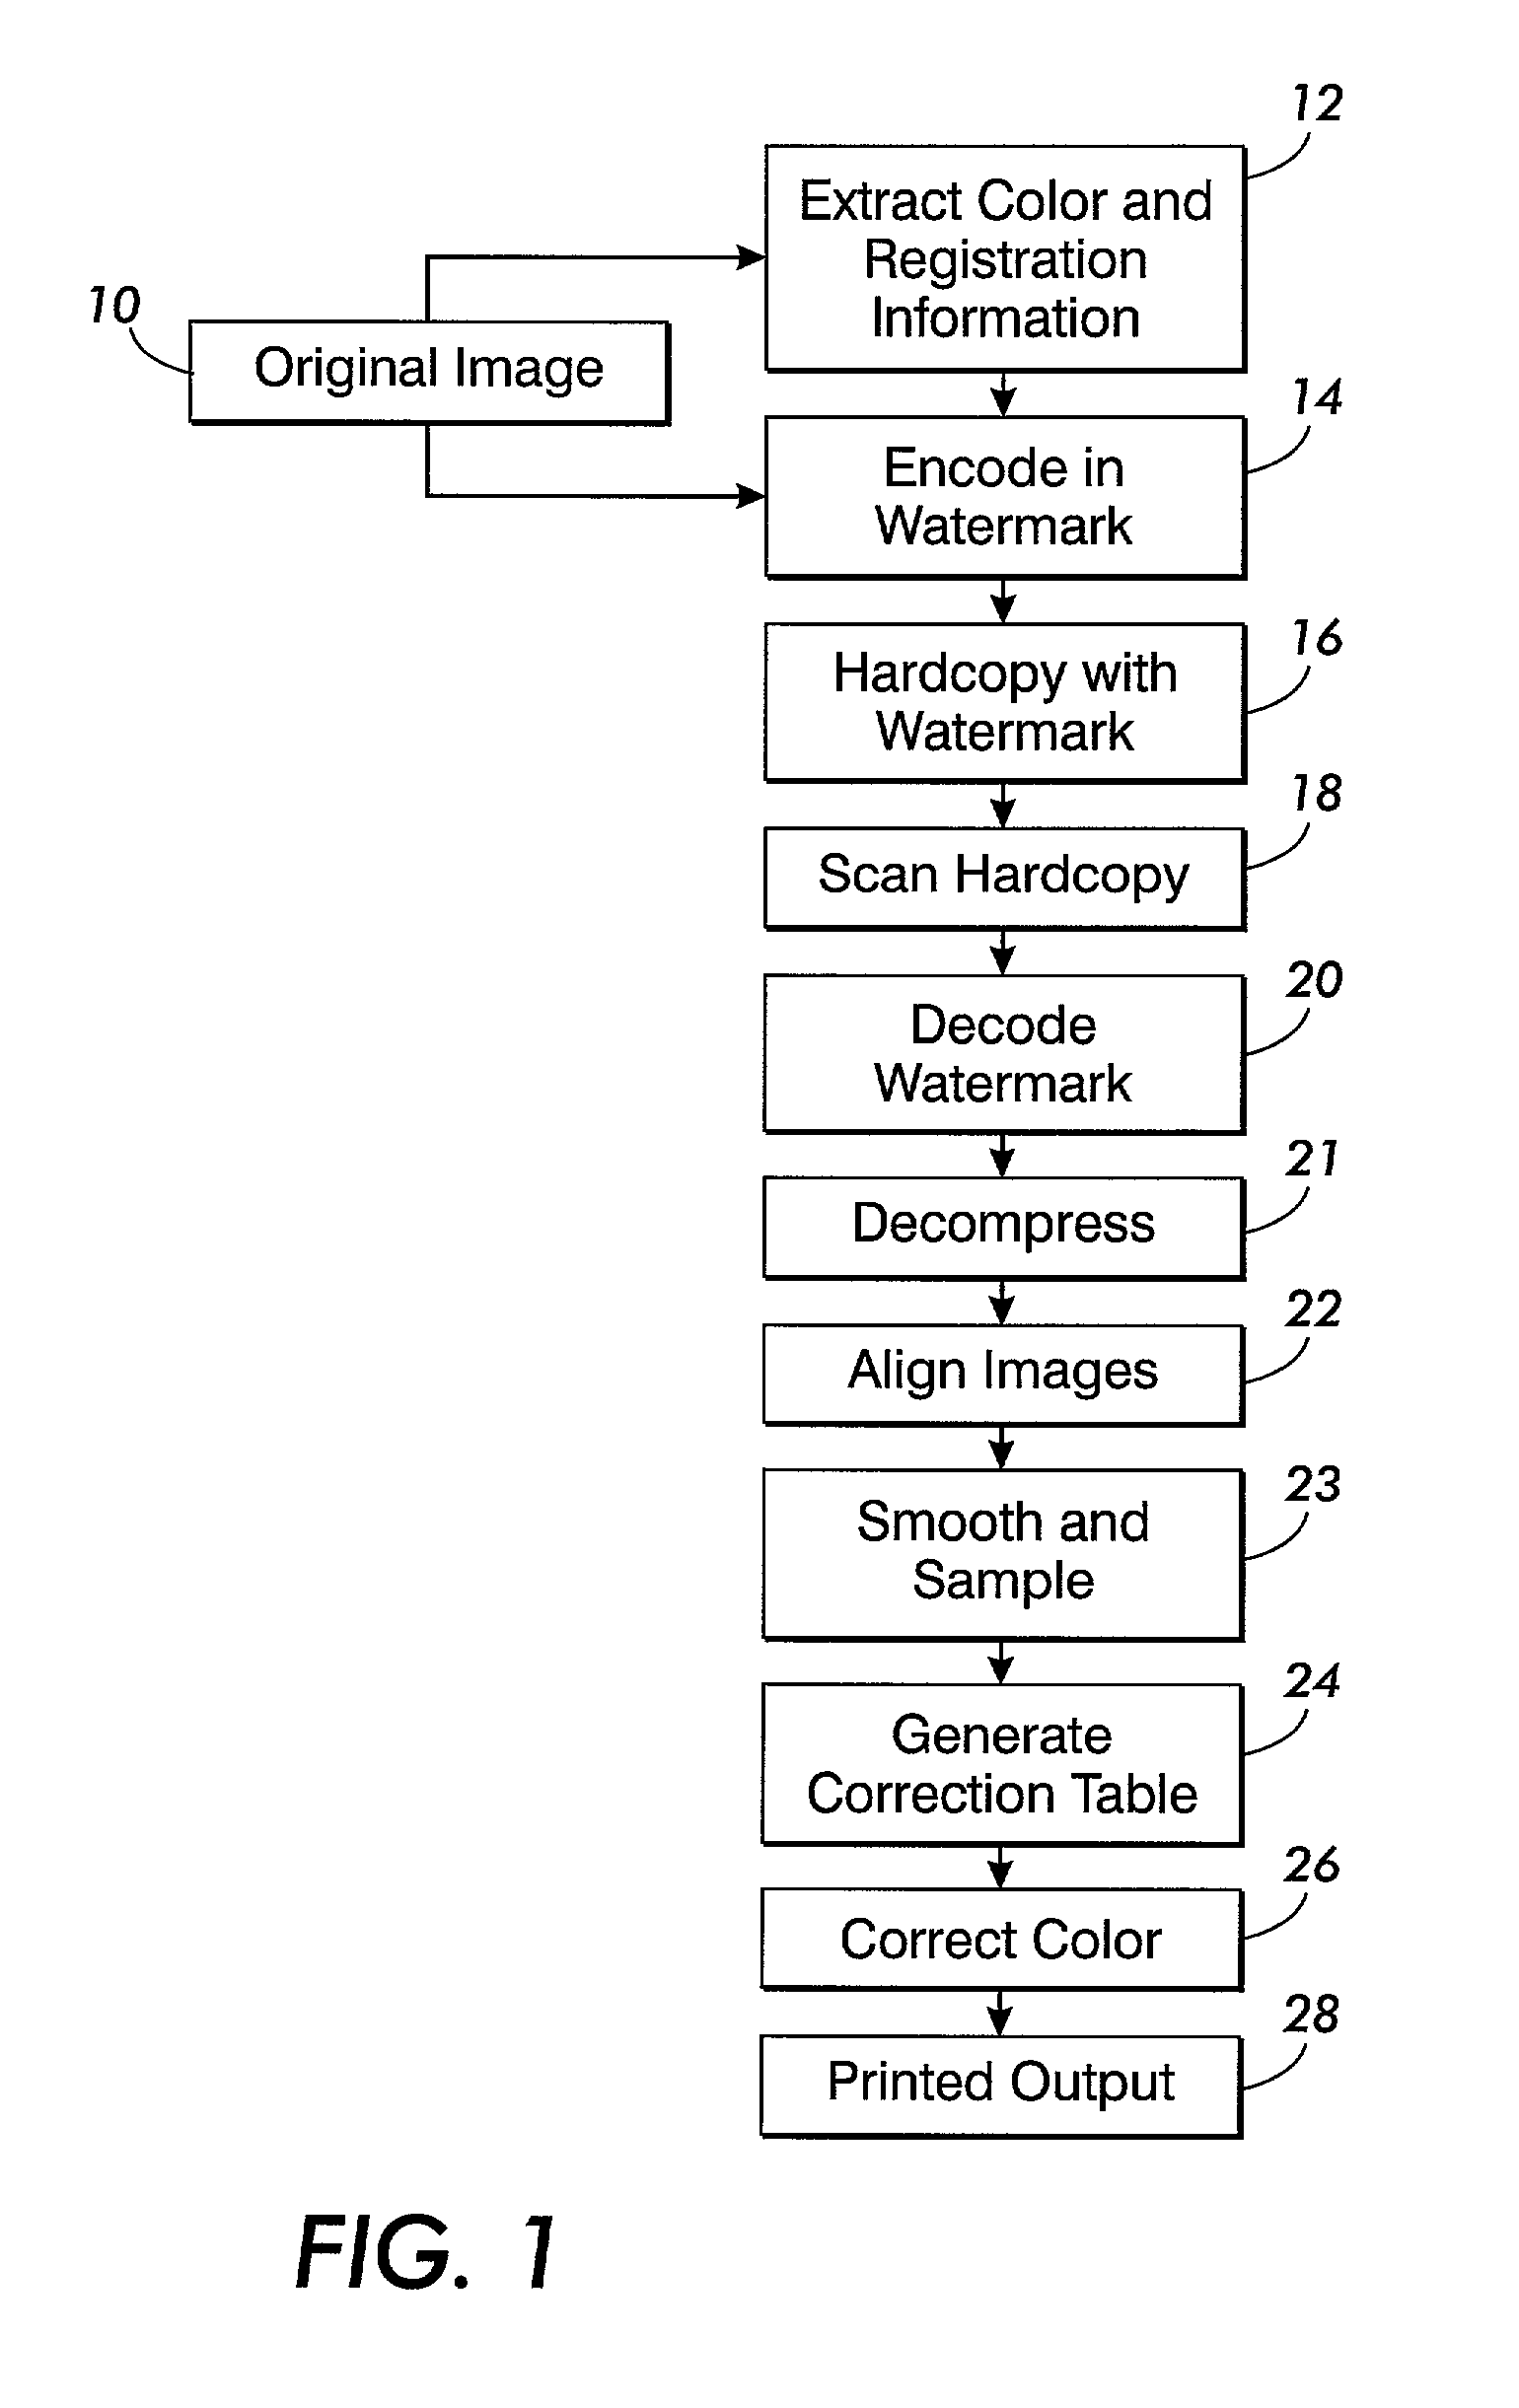 Method of embedding color information in printed documents using watermarking